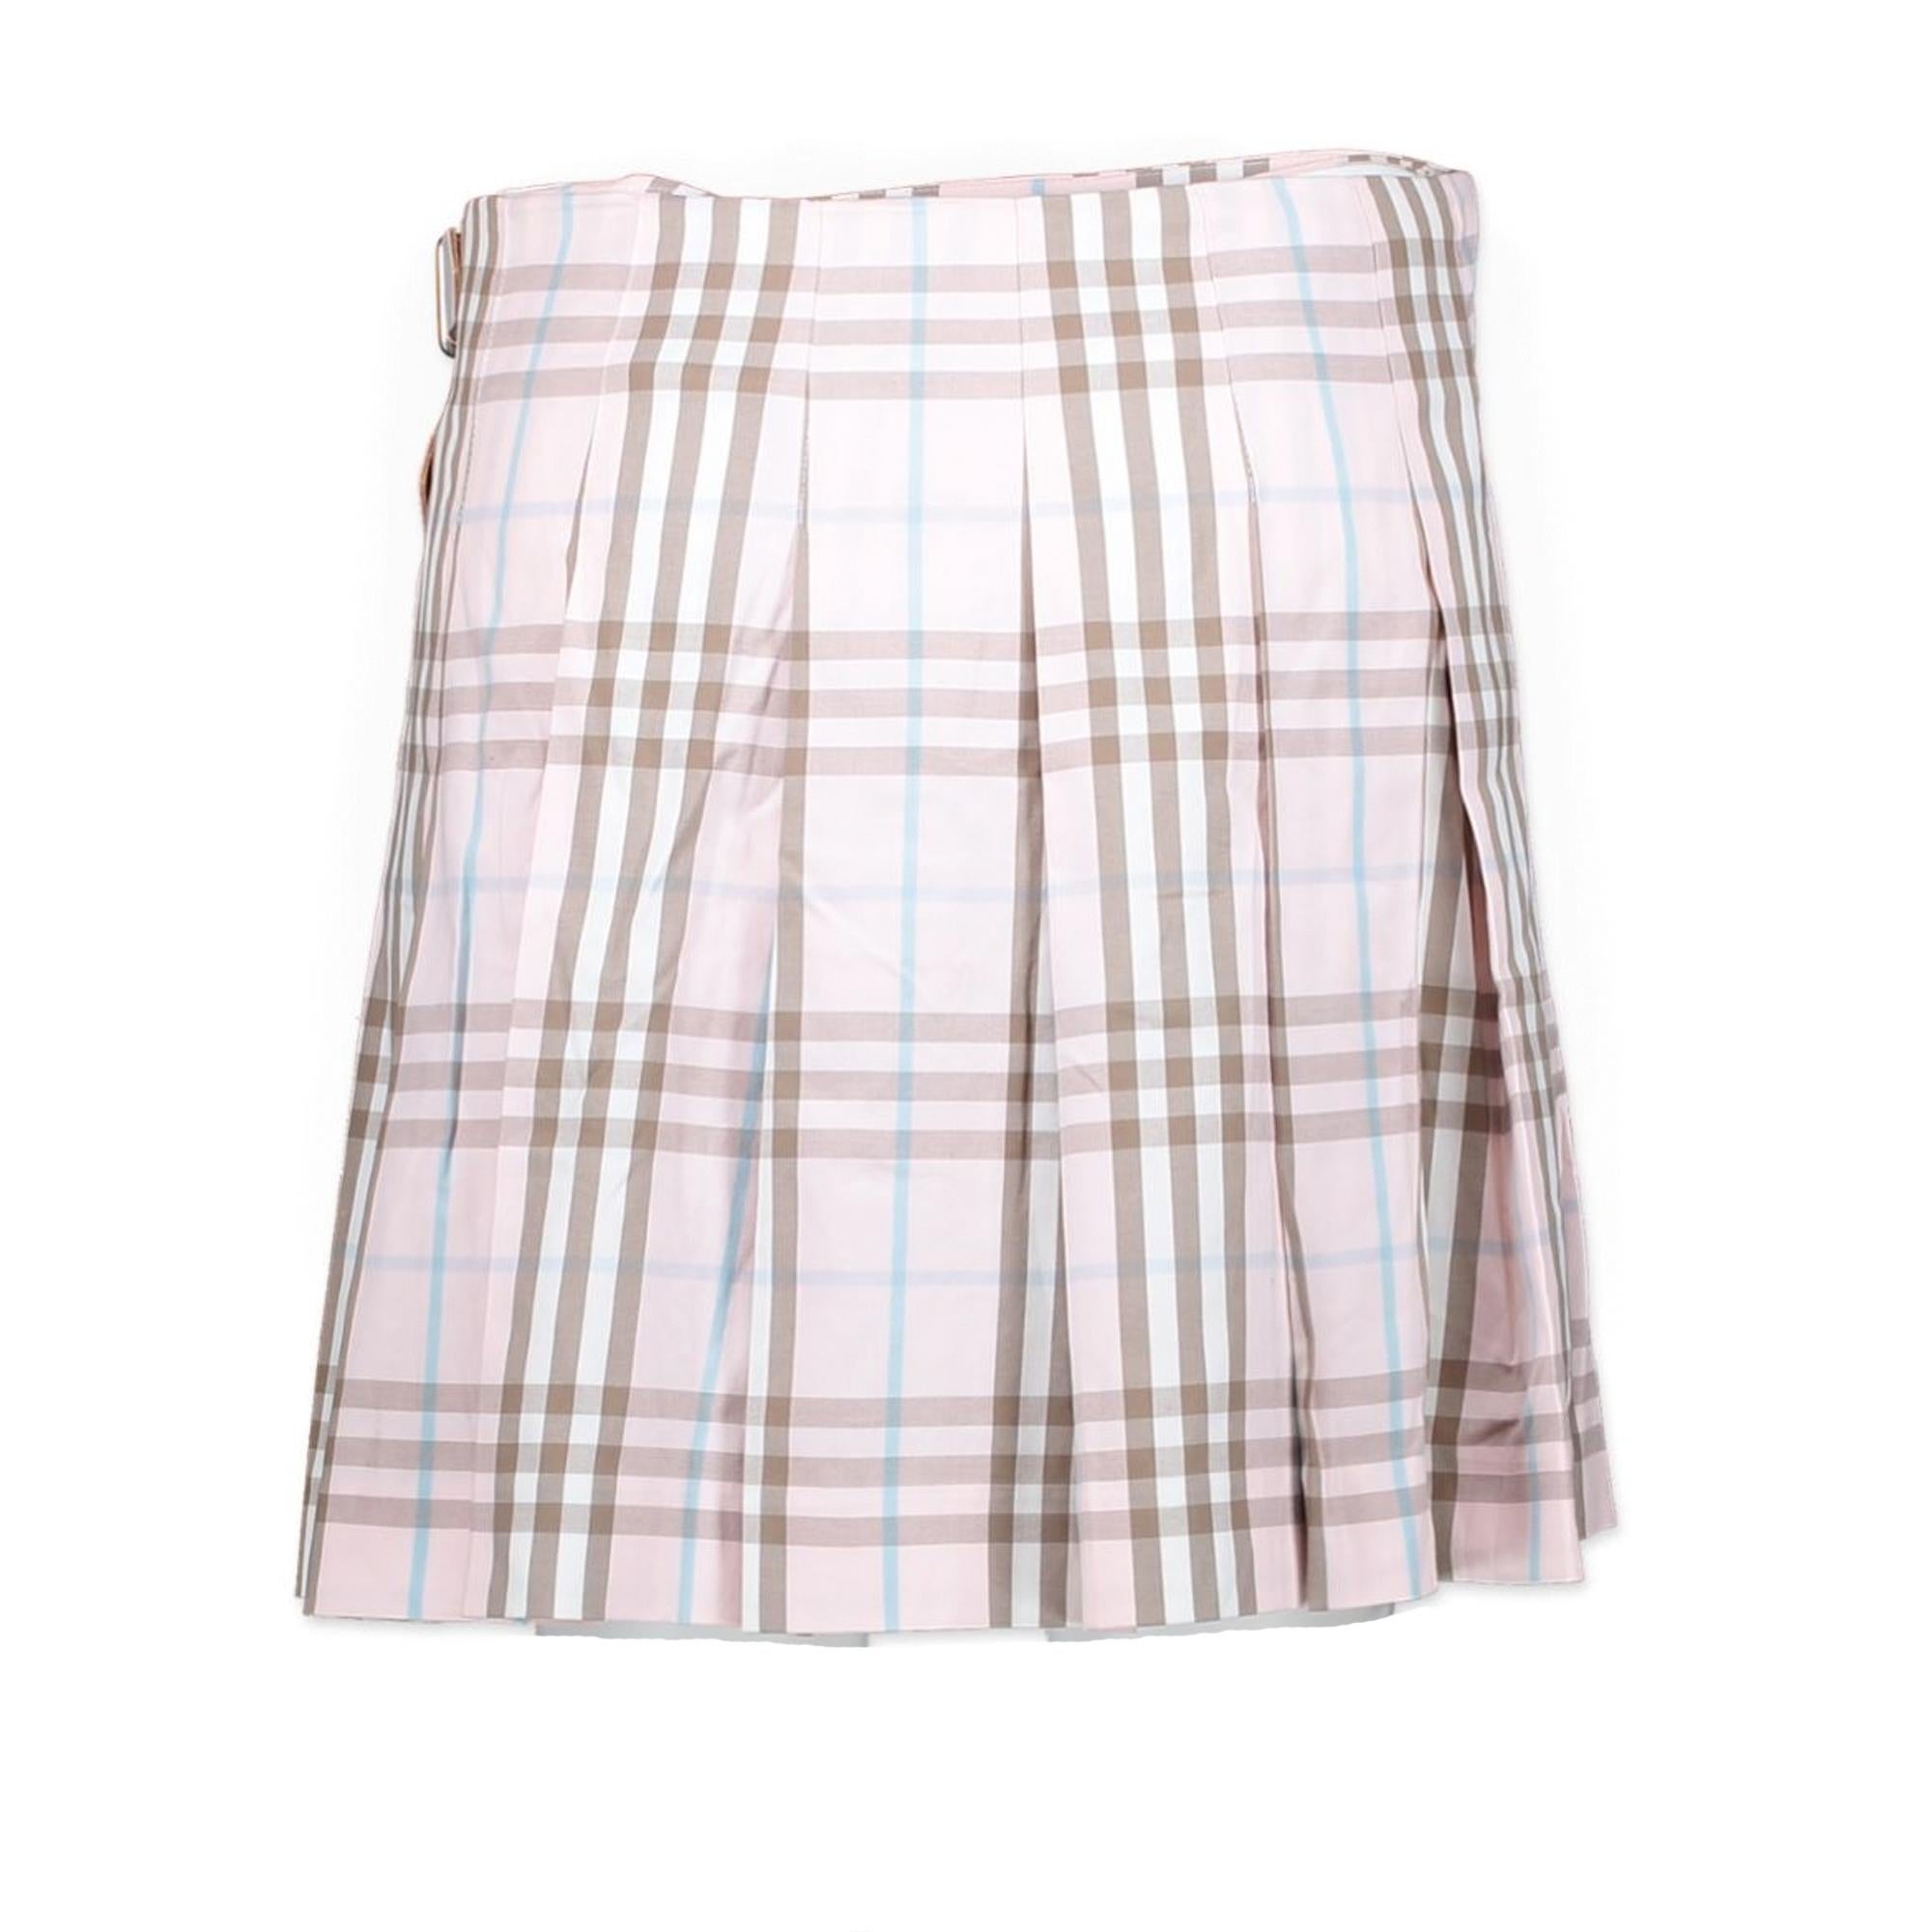 In good condition

Burberry Pleated Pink Mini Skirt - Size 36

Pleated wrap skirt by Burberry with two white leather belt details on the side. This skirt features the iconic check pattern in pink, white and blue in other words a true vintage piece.